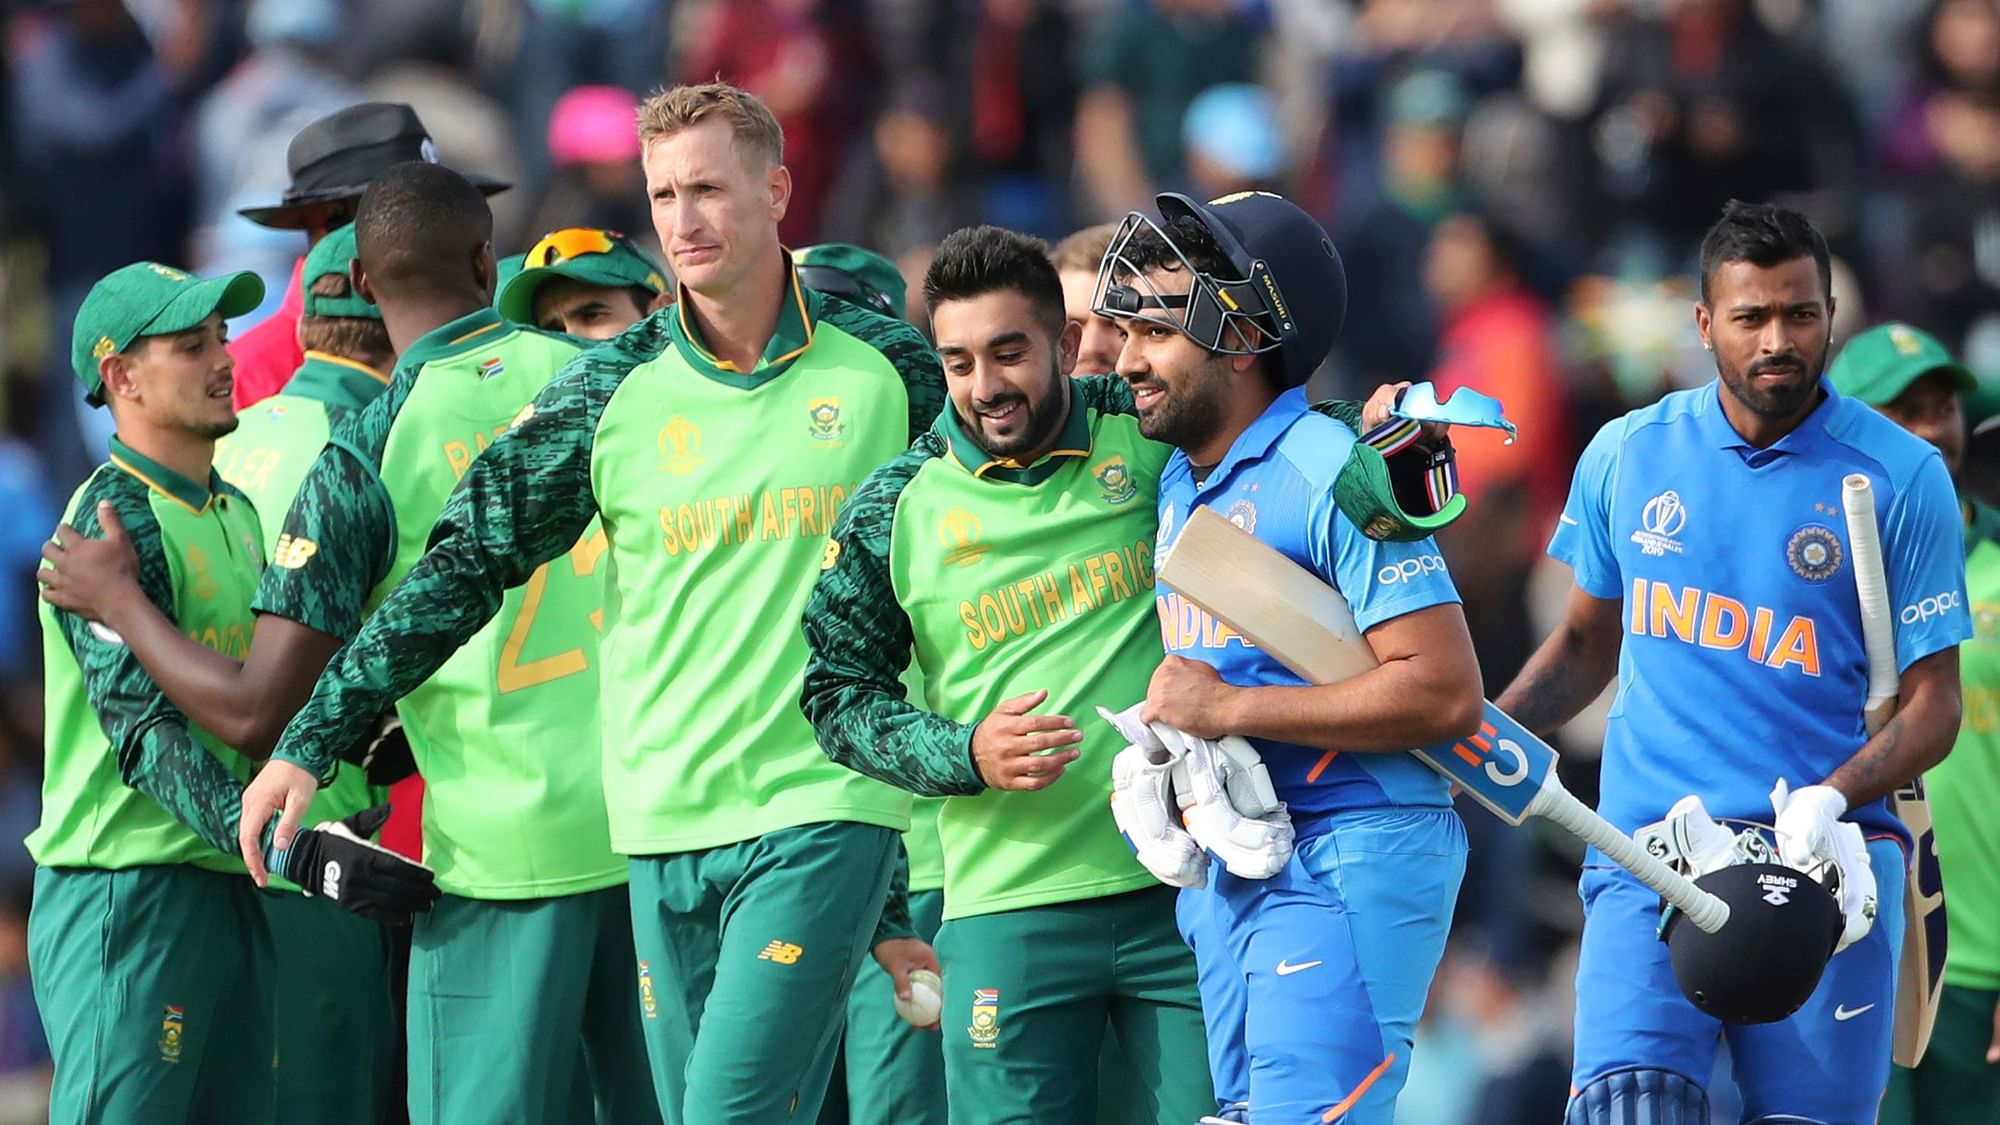 South Africa’s Tabraiz Shamsi, third right, congratulates India’s Rohit Sharma after India beat South Africa at the Hampshire Bowl in Southampton, England.